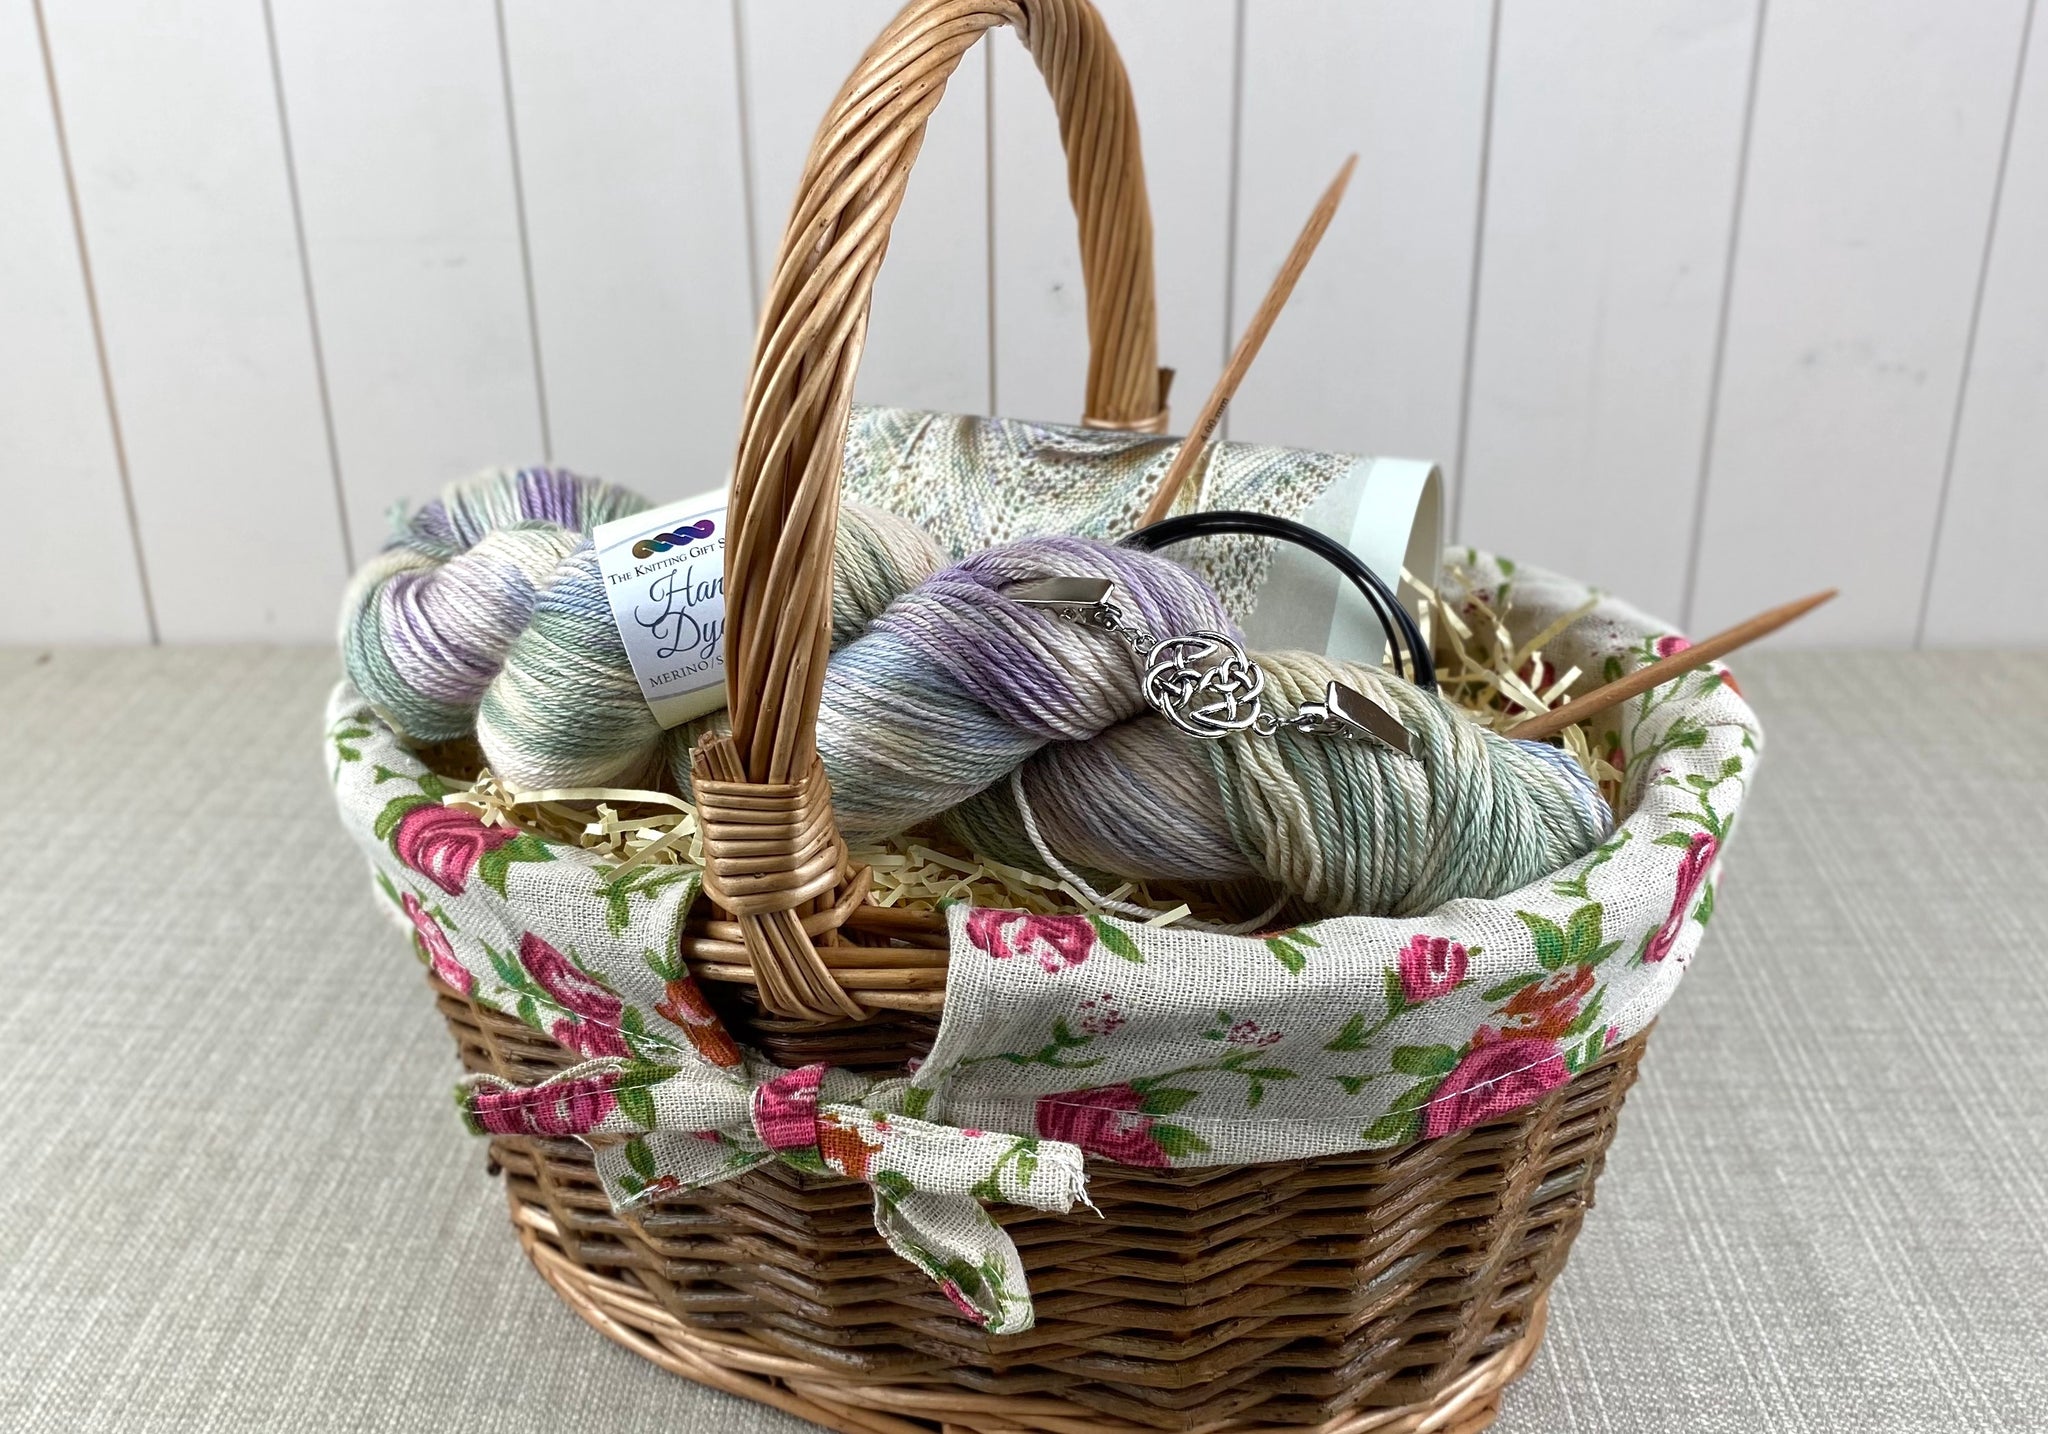 The Knitting Gift Shop - Knitting Gifts | Bags & Cases | Yarn Holders